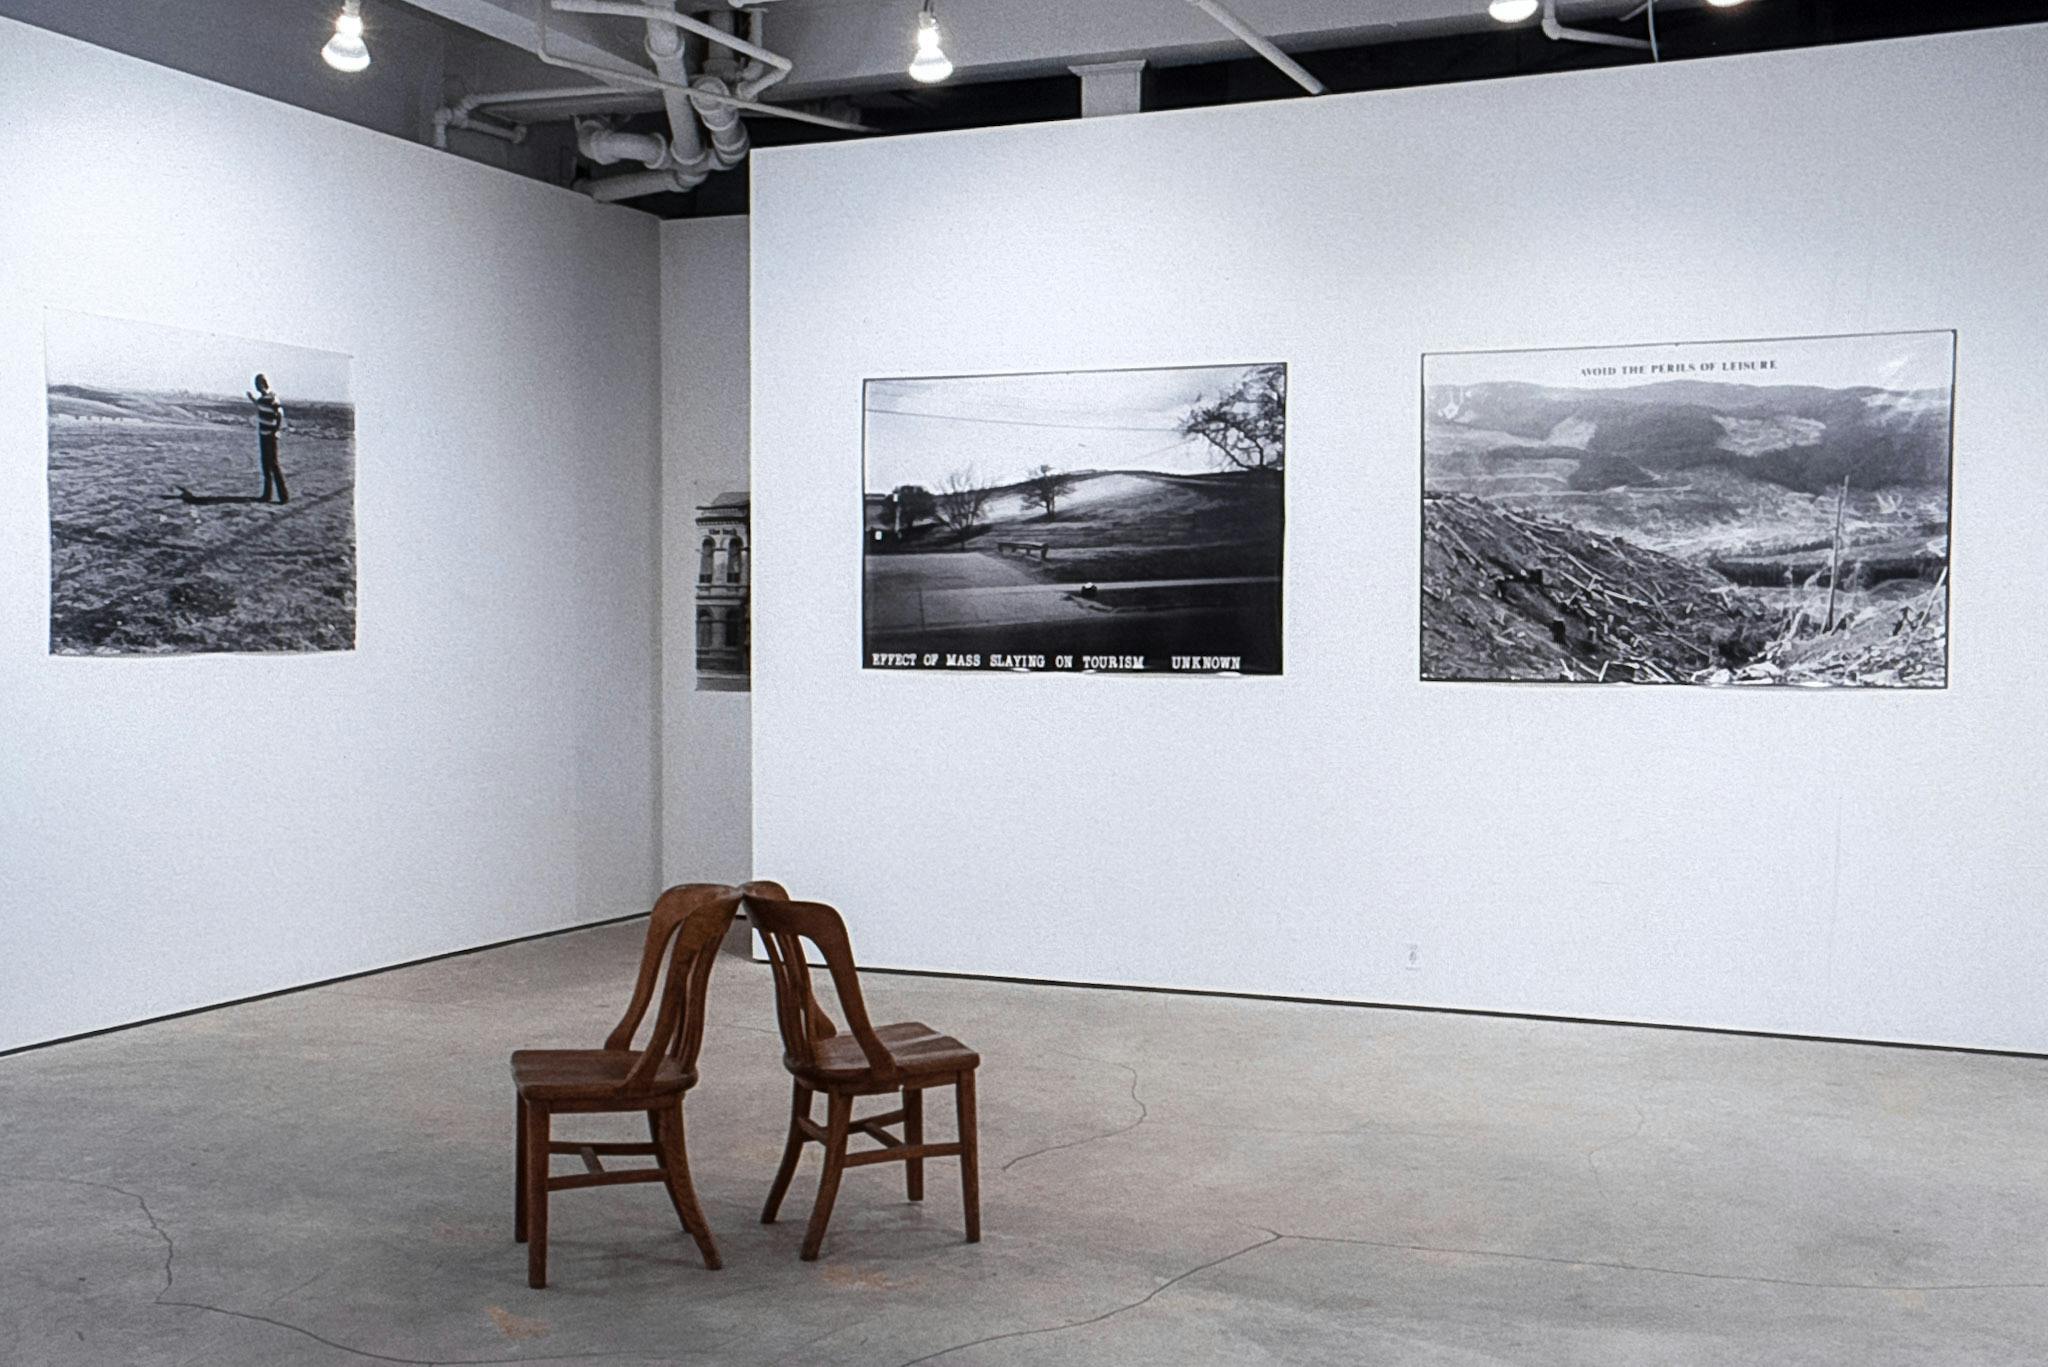 A gallery with large photos on a wall. One shows an empty park, with text that reads "Effect of Mass Slaying on Tourism, Unknown." In the center of the room, two wood chairs sit back to back. 